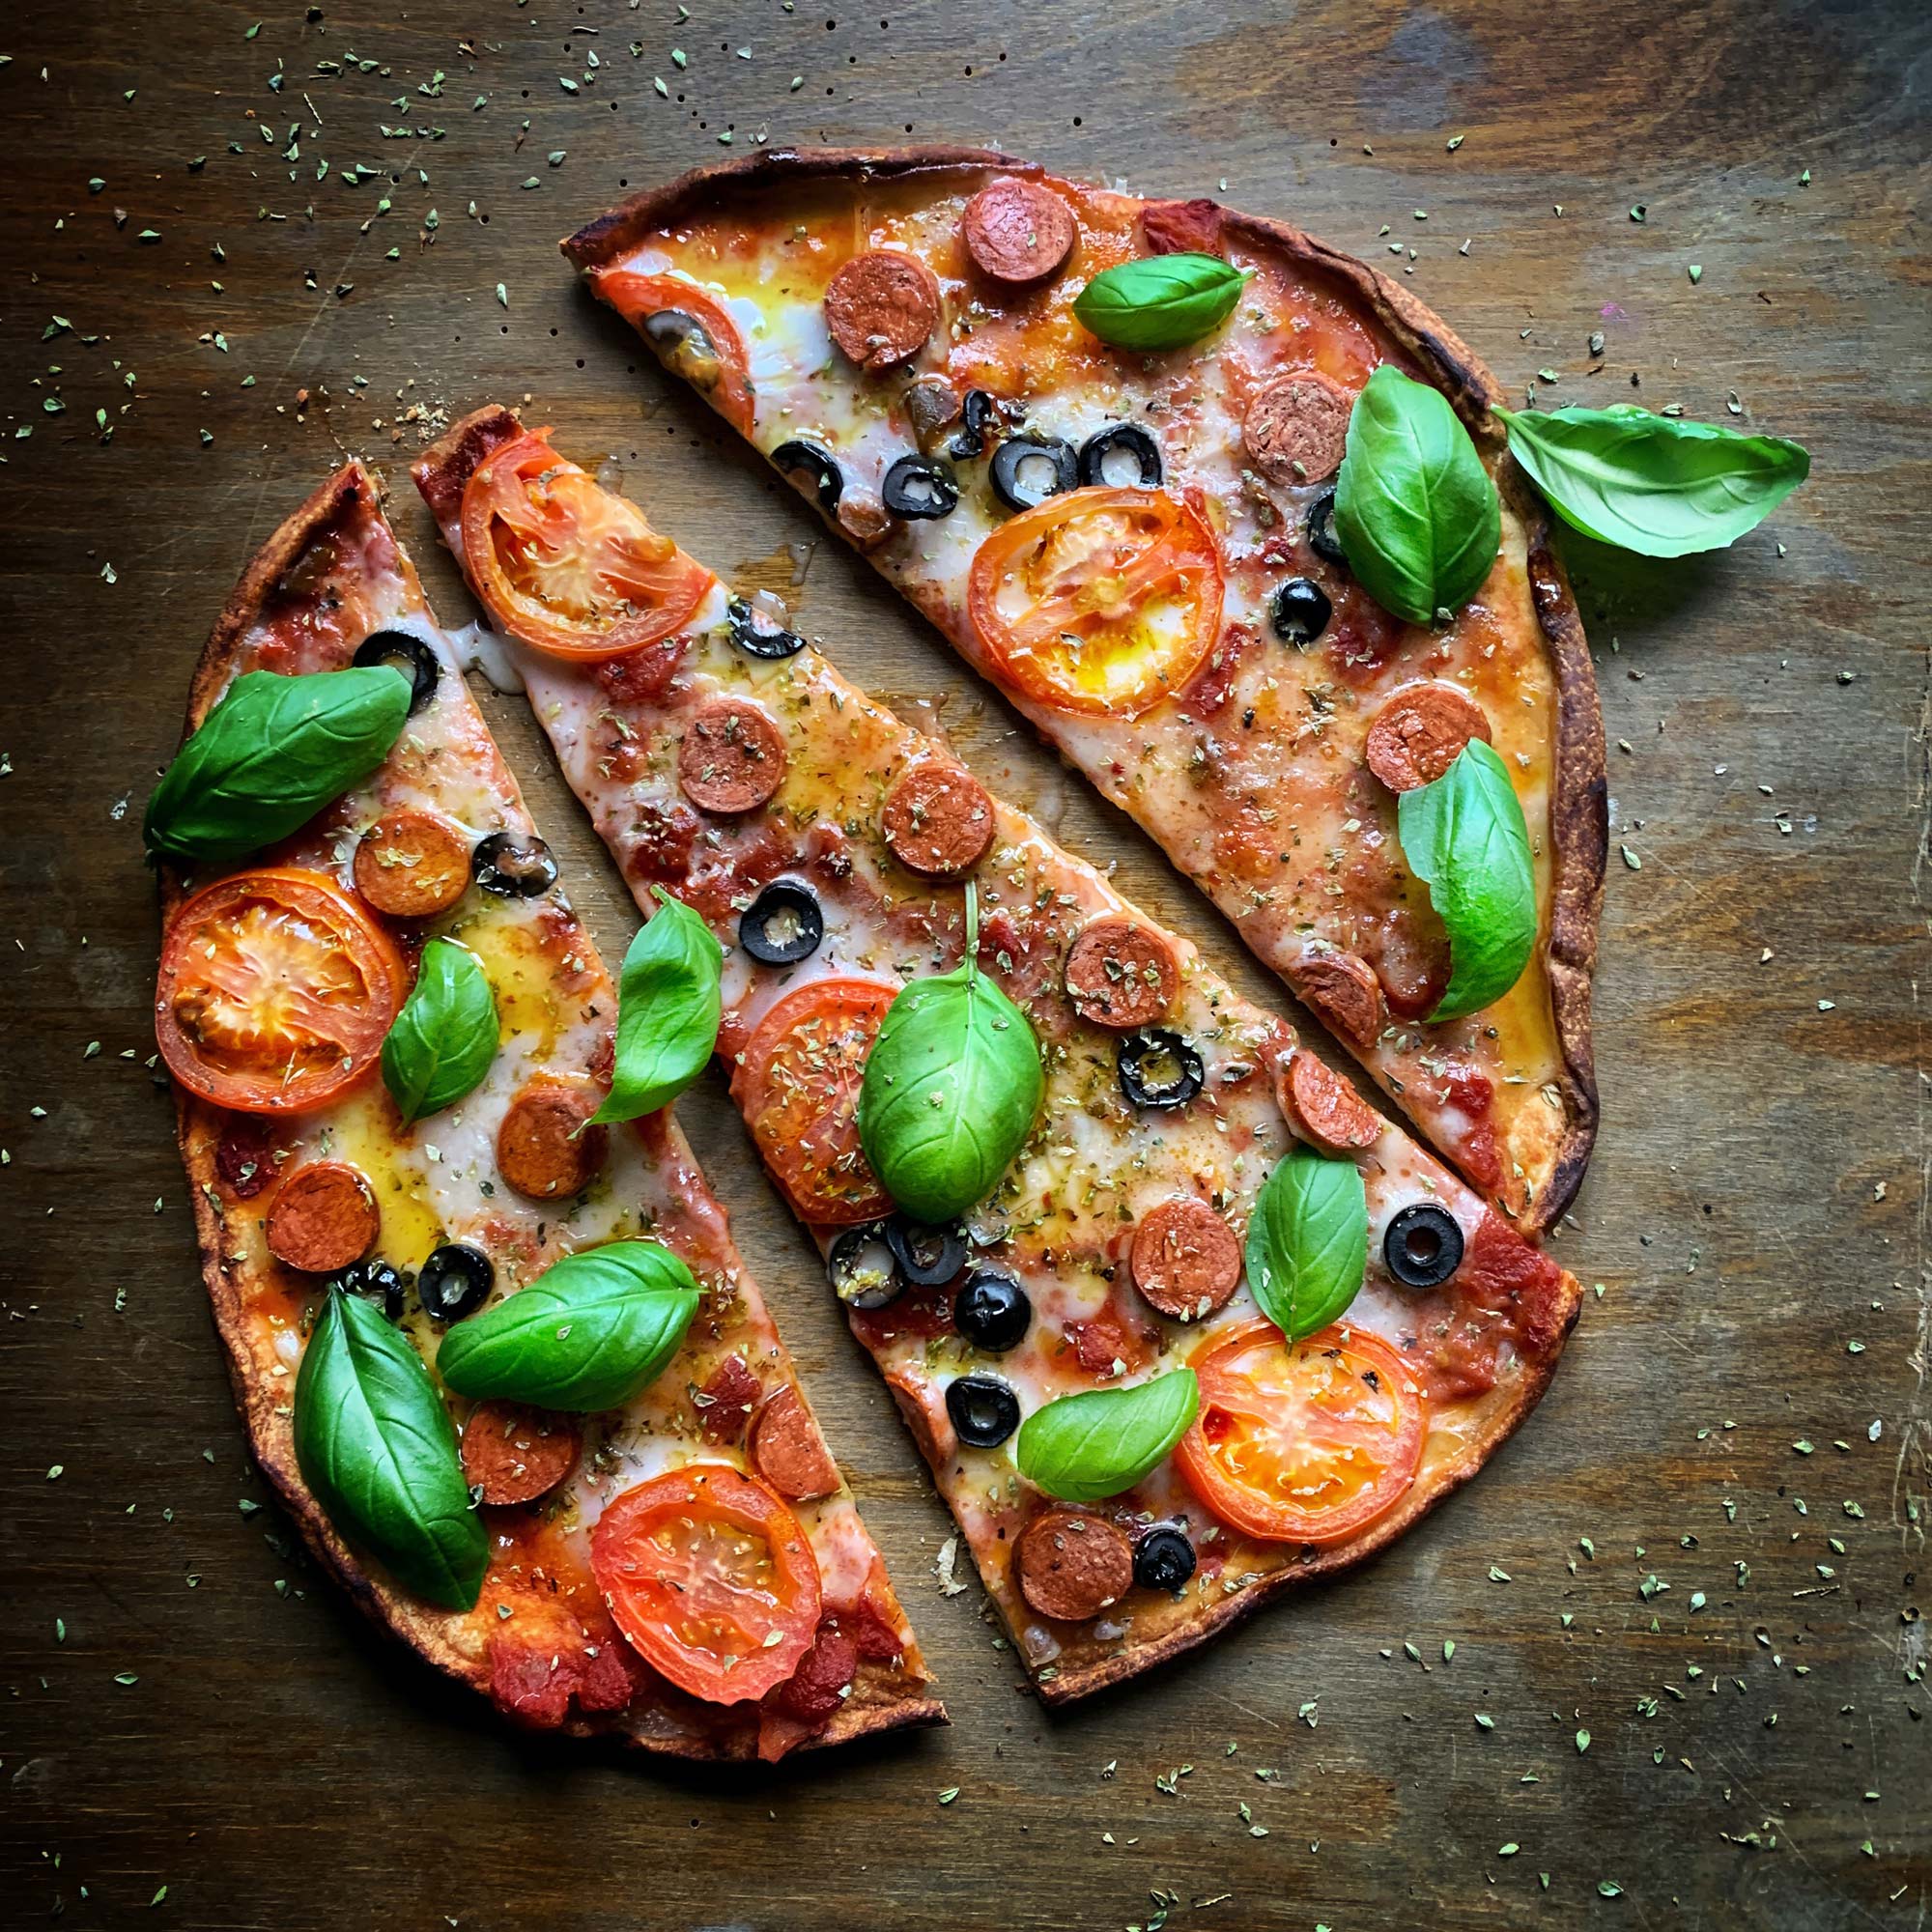 Wood fired pizza with tomatoes, basil, pepperoni and olives